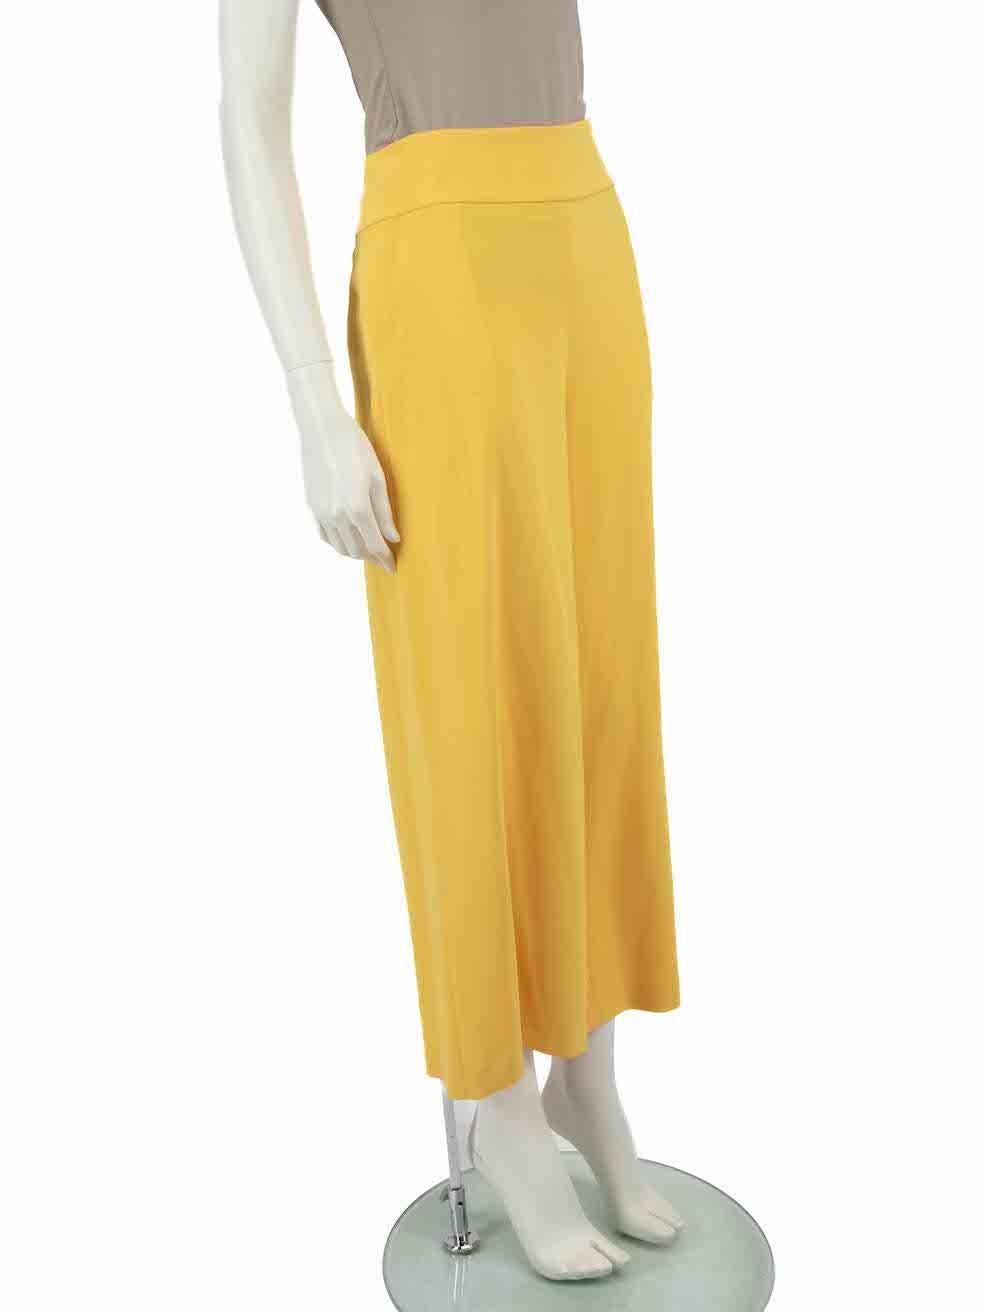 CONDITION is Never worn, with tags. No visible wear to trousers is evident on this new Alice + Olivia designer resale item.
 
 
 
 Details
 
 
 Yellow
 
 Polyester
 
 Trousers
 
 Wide leg
 
 High rise
 
 Back zip fastening
 
 2x Side pockets
 
 
 
